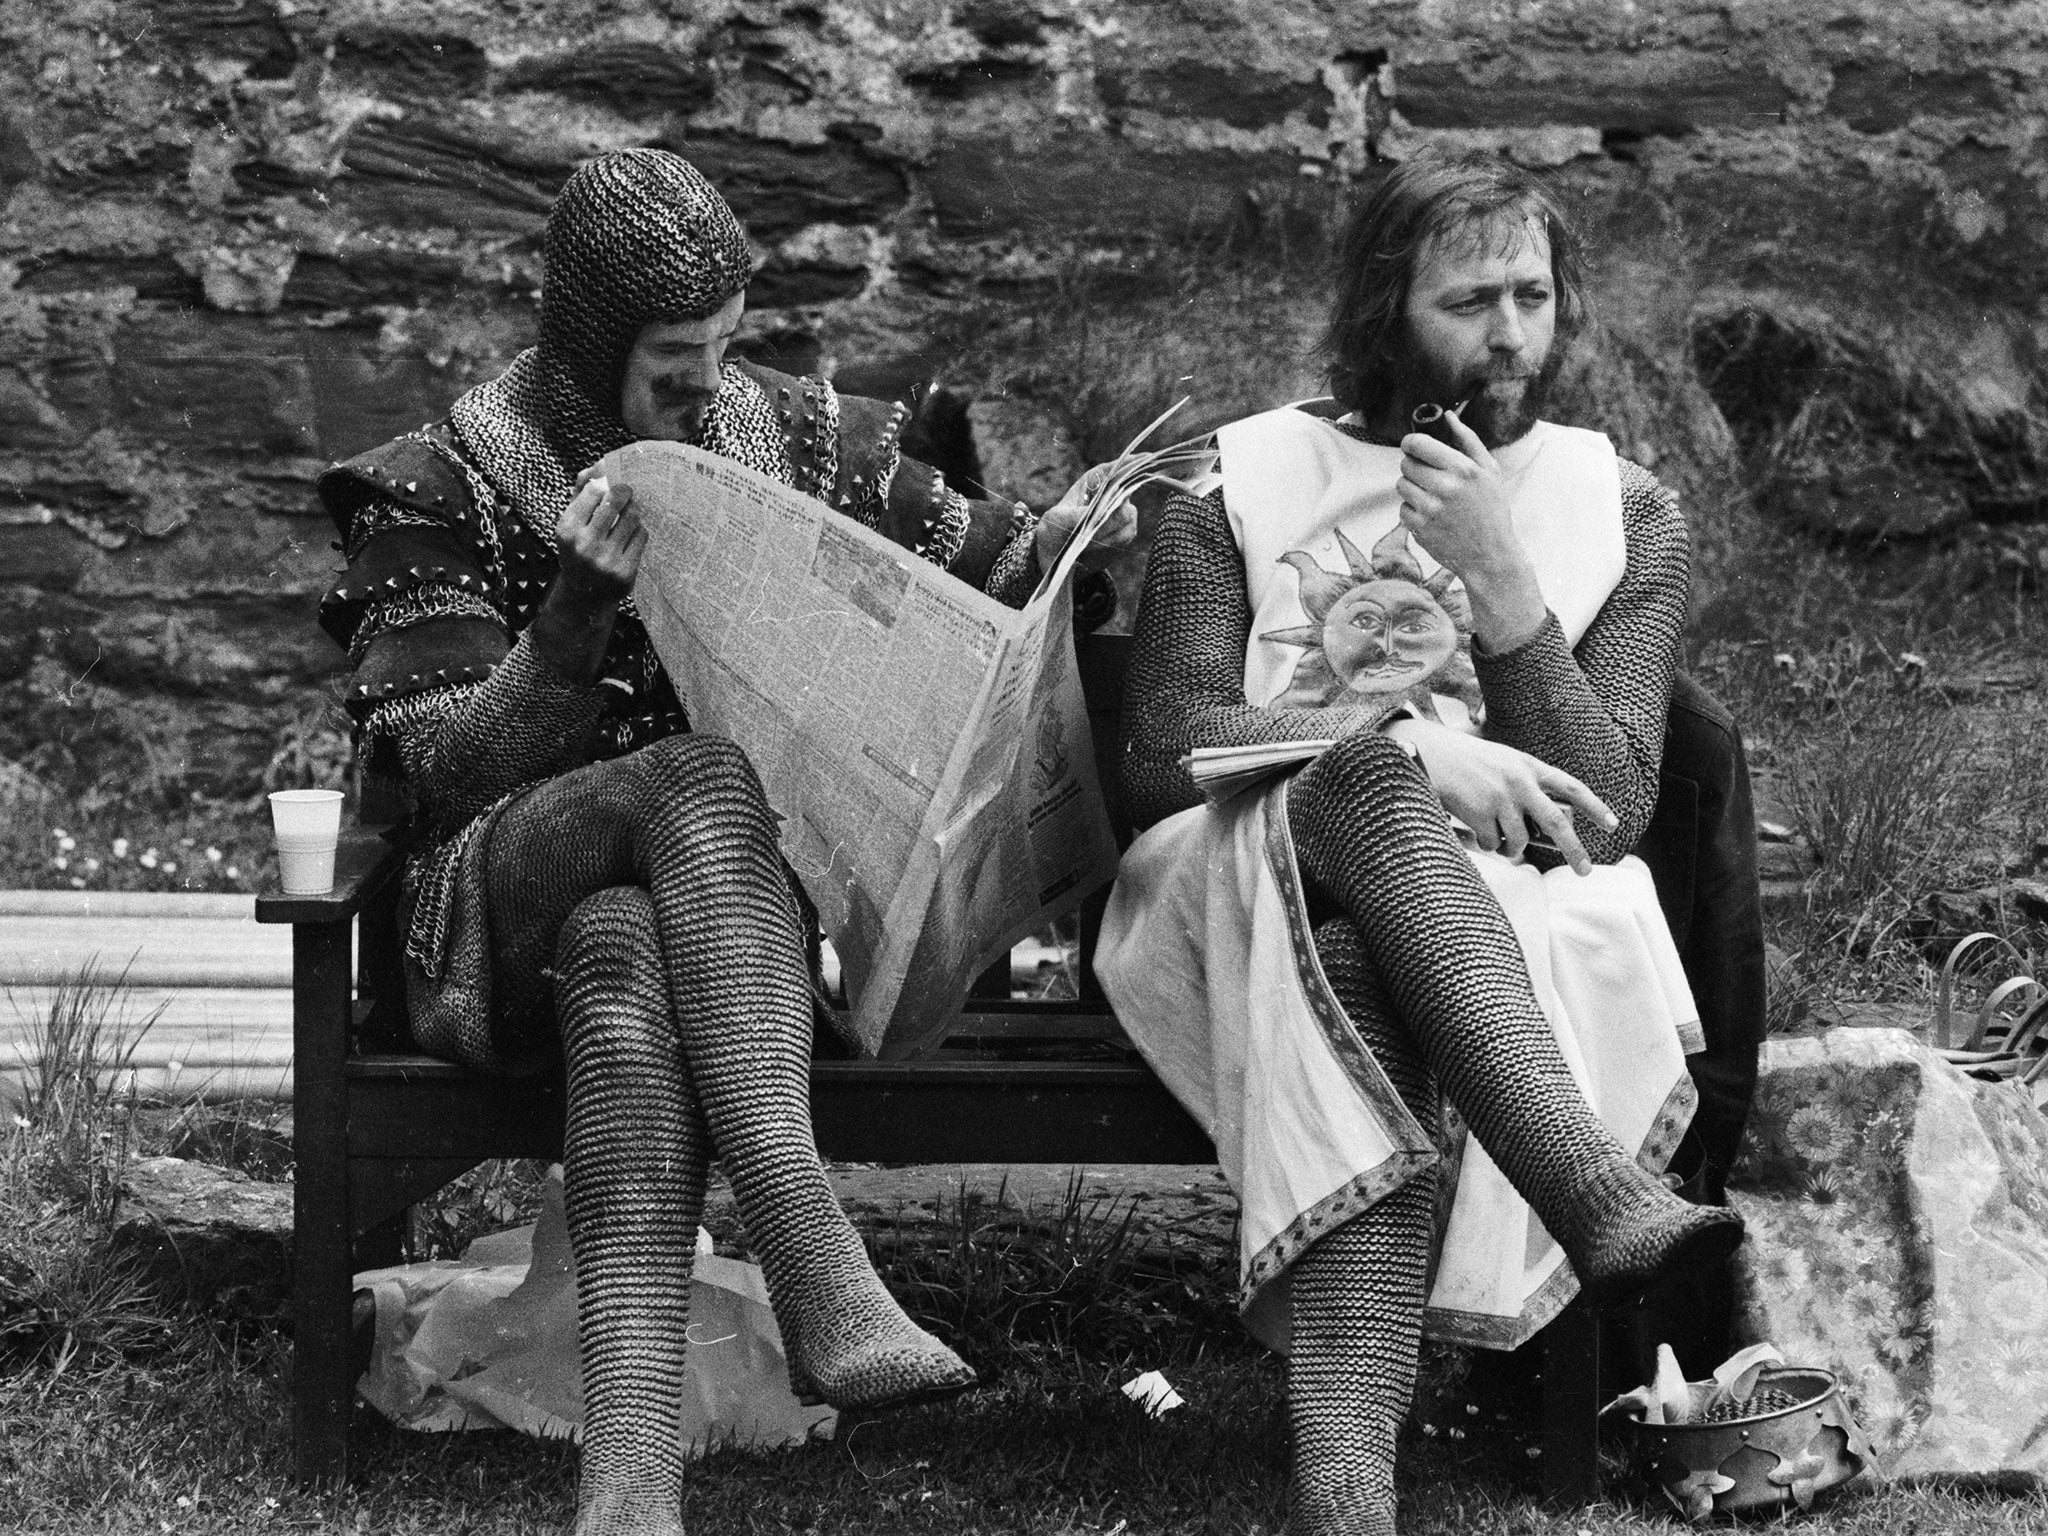 A chainmail-clad John Cleese reads a newspaper while Graham Chapman smokes a quiet pipe on the set of Monty Python and the Holy Grail in 1974